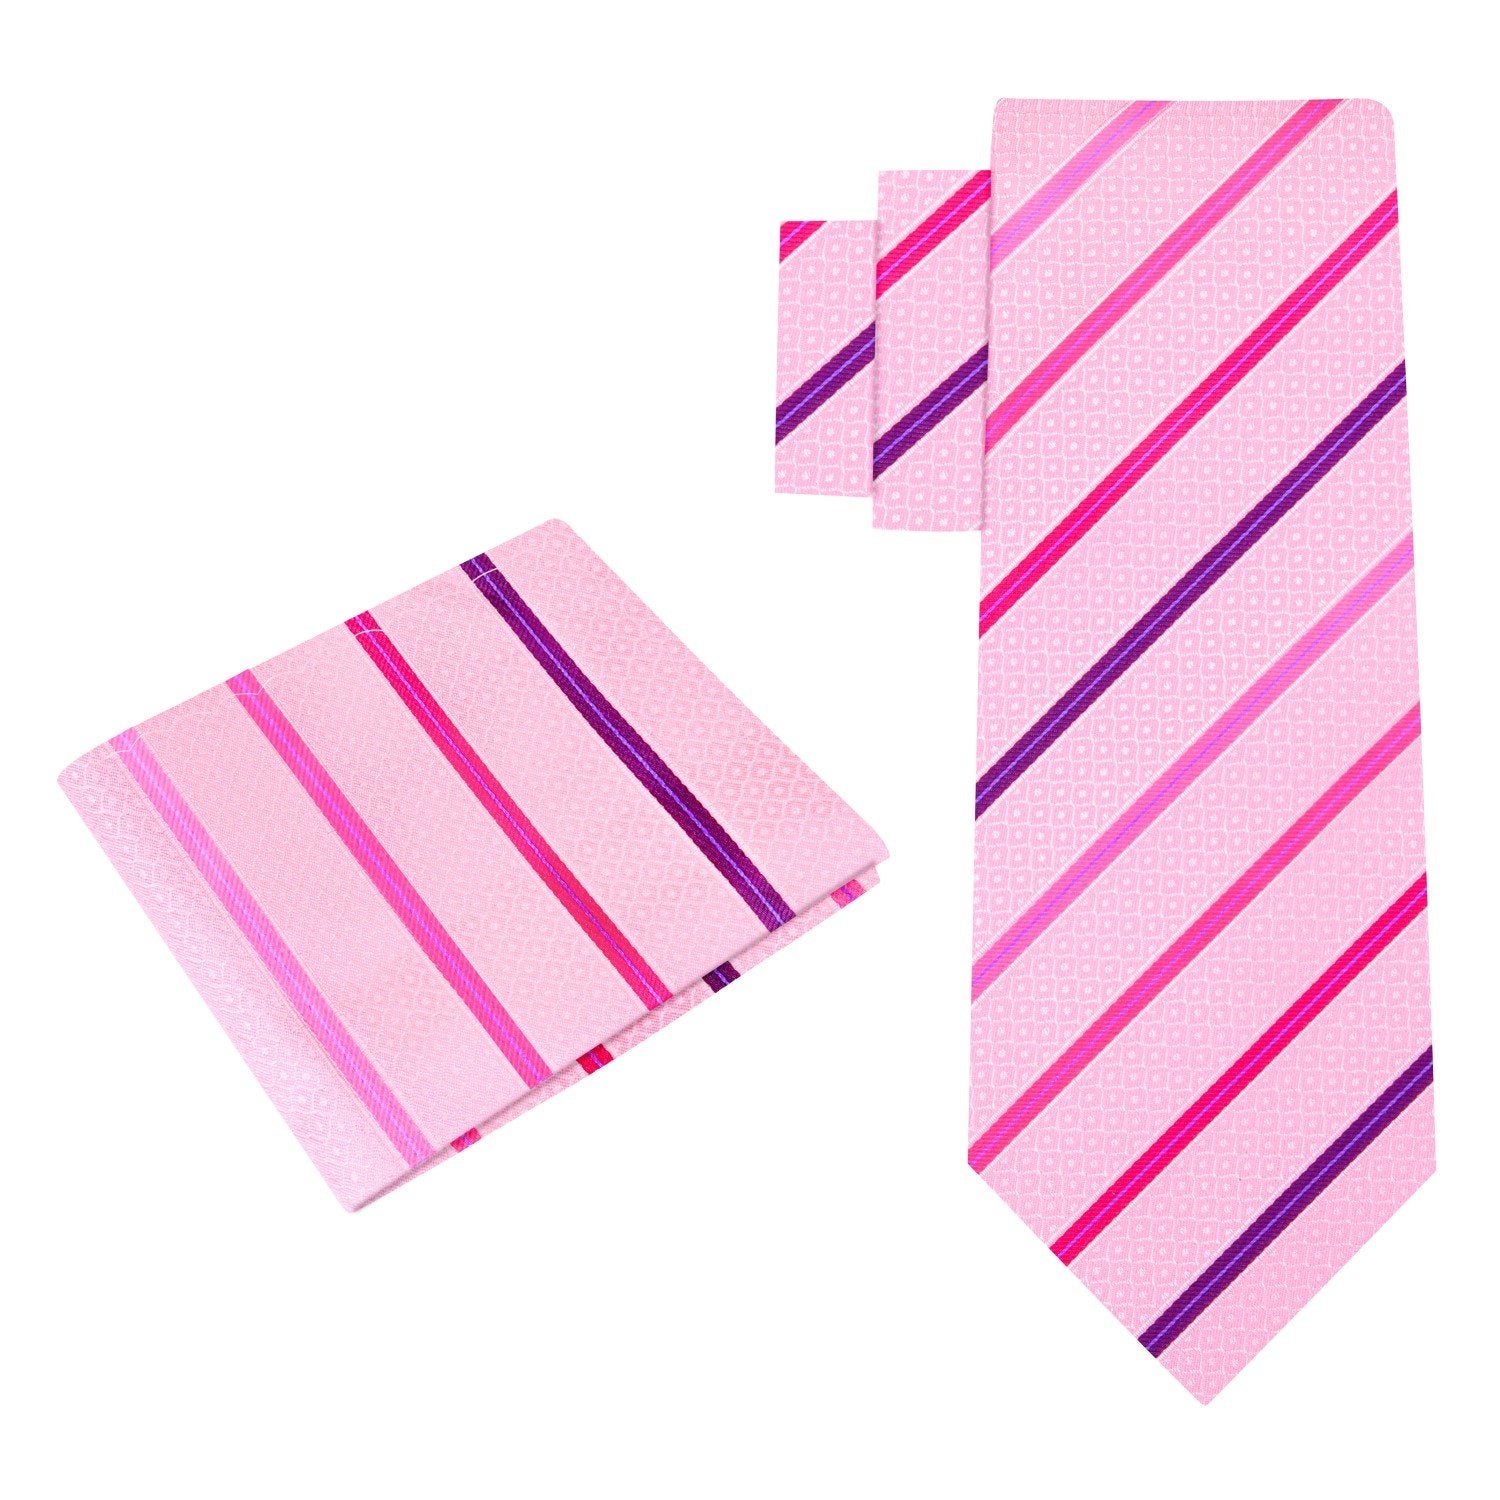 Alt View: Pink Stripe Tie and Square